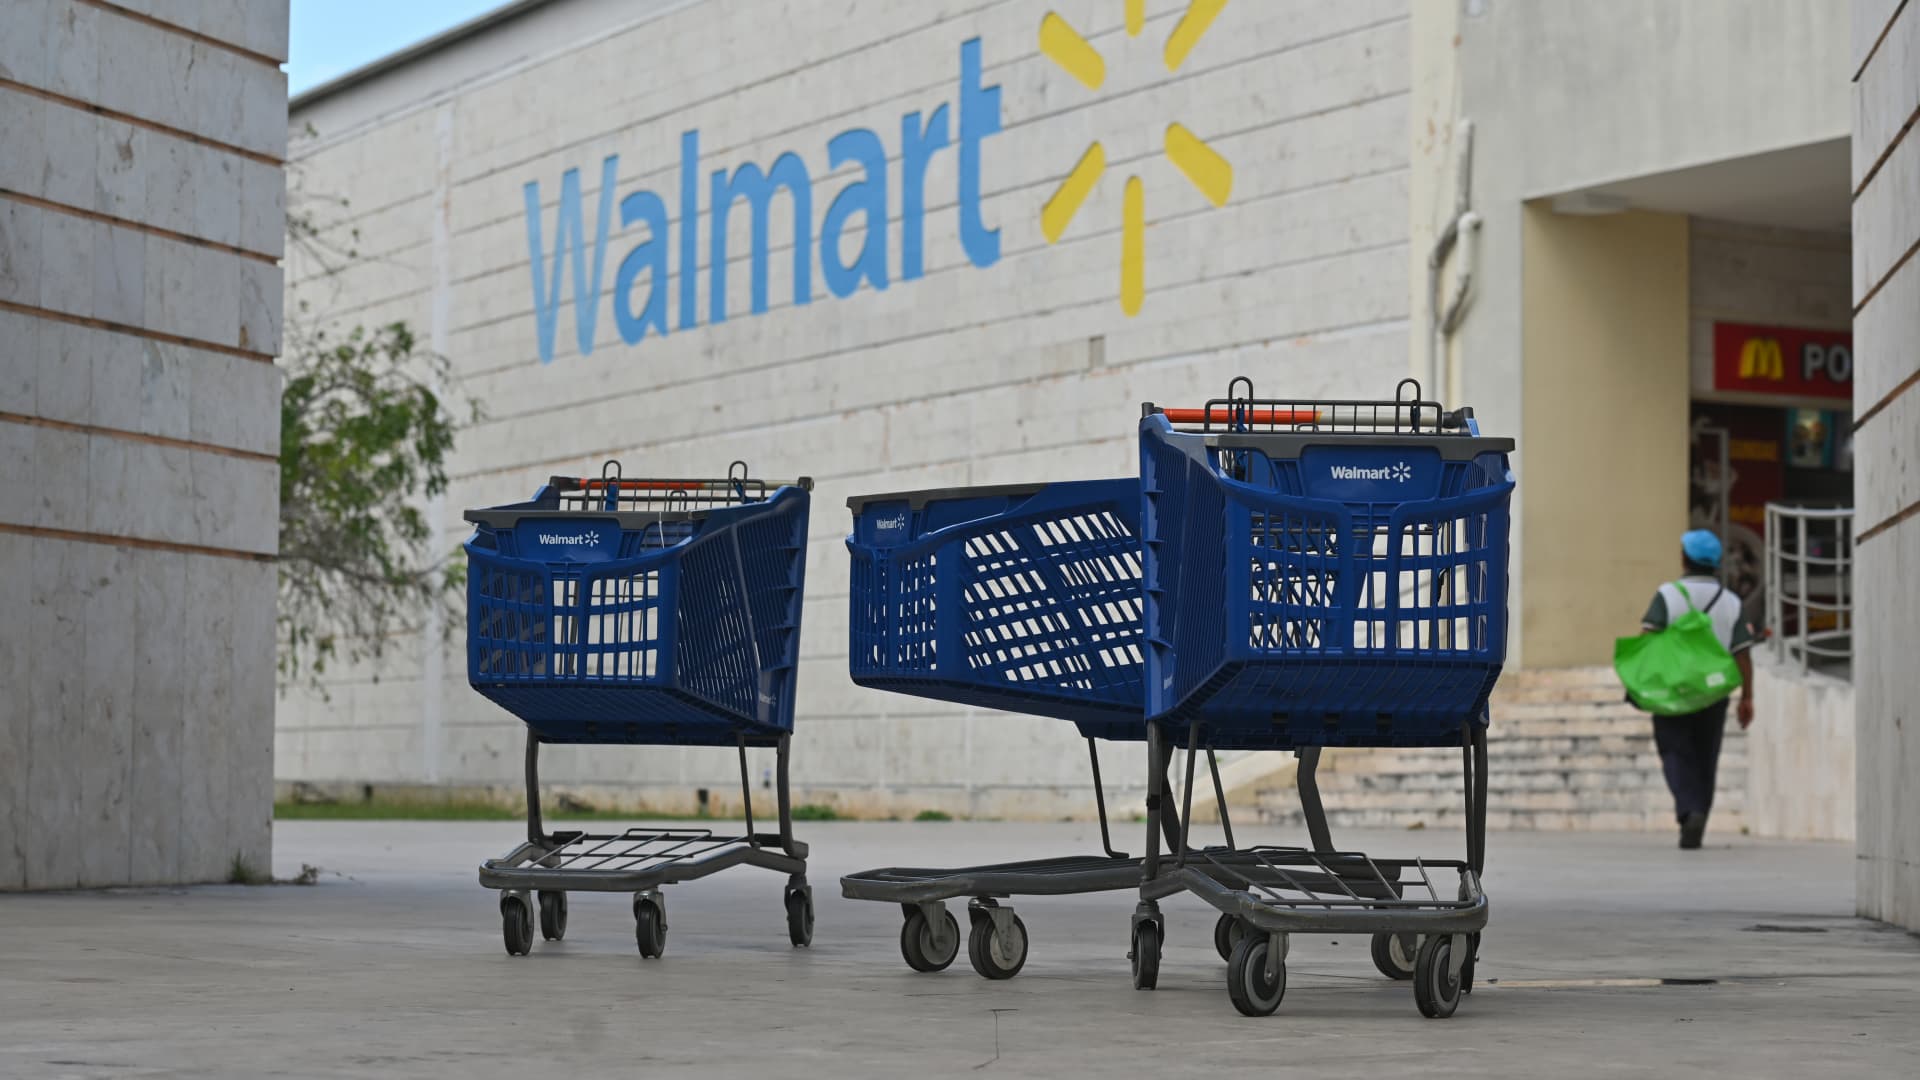 Walmart cuts profit guidance as inflation forces shoppers to spend more on food